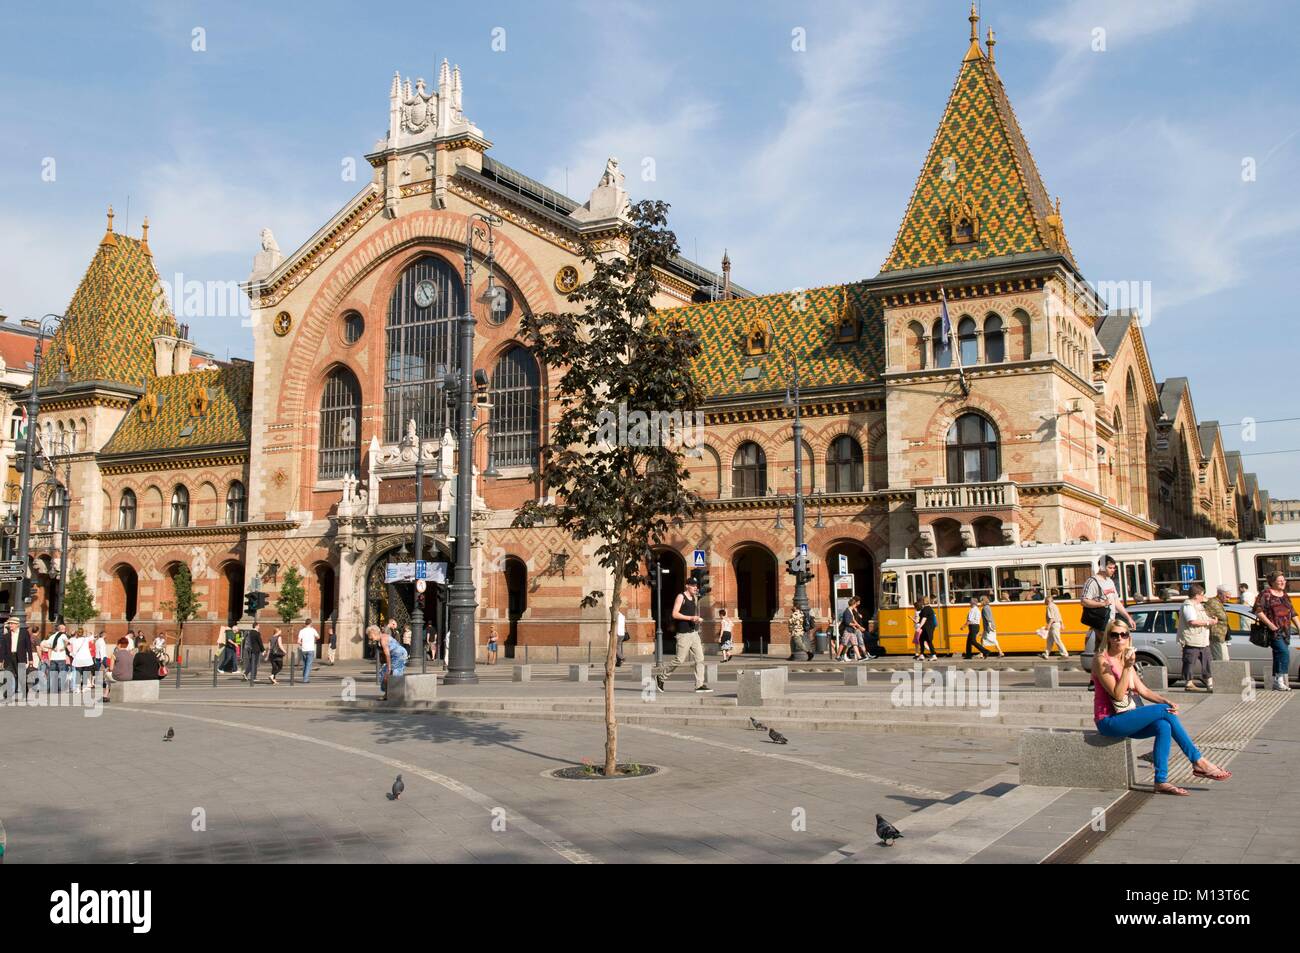 Hungary, Budapest, Pest district, central market Stock Photo